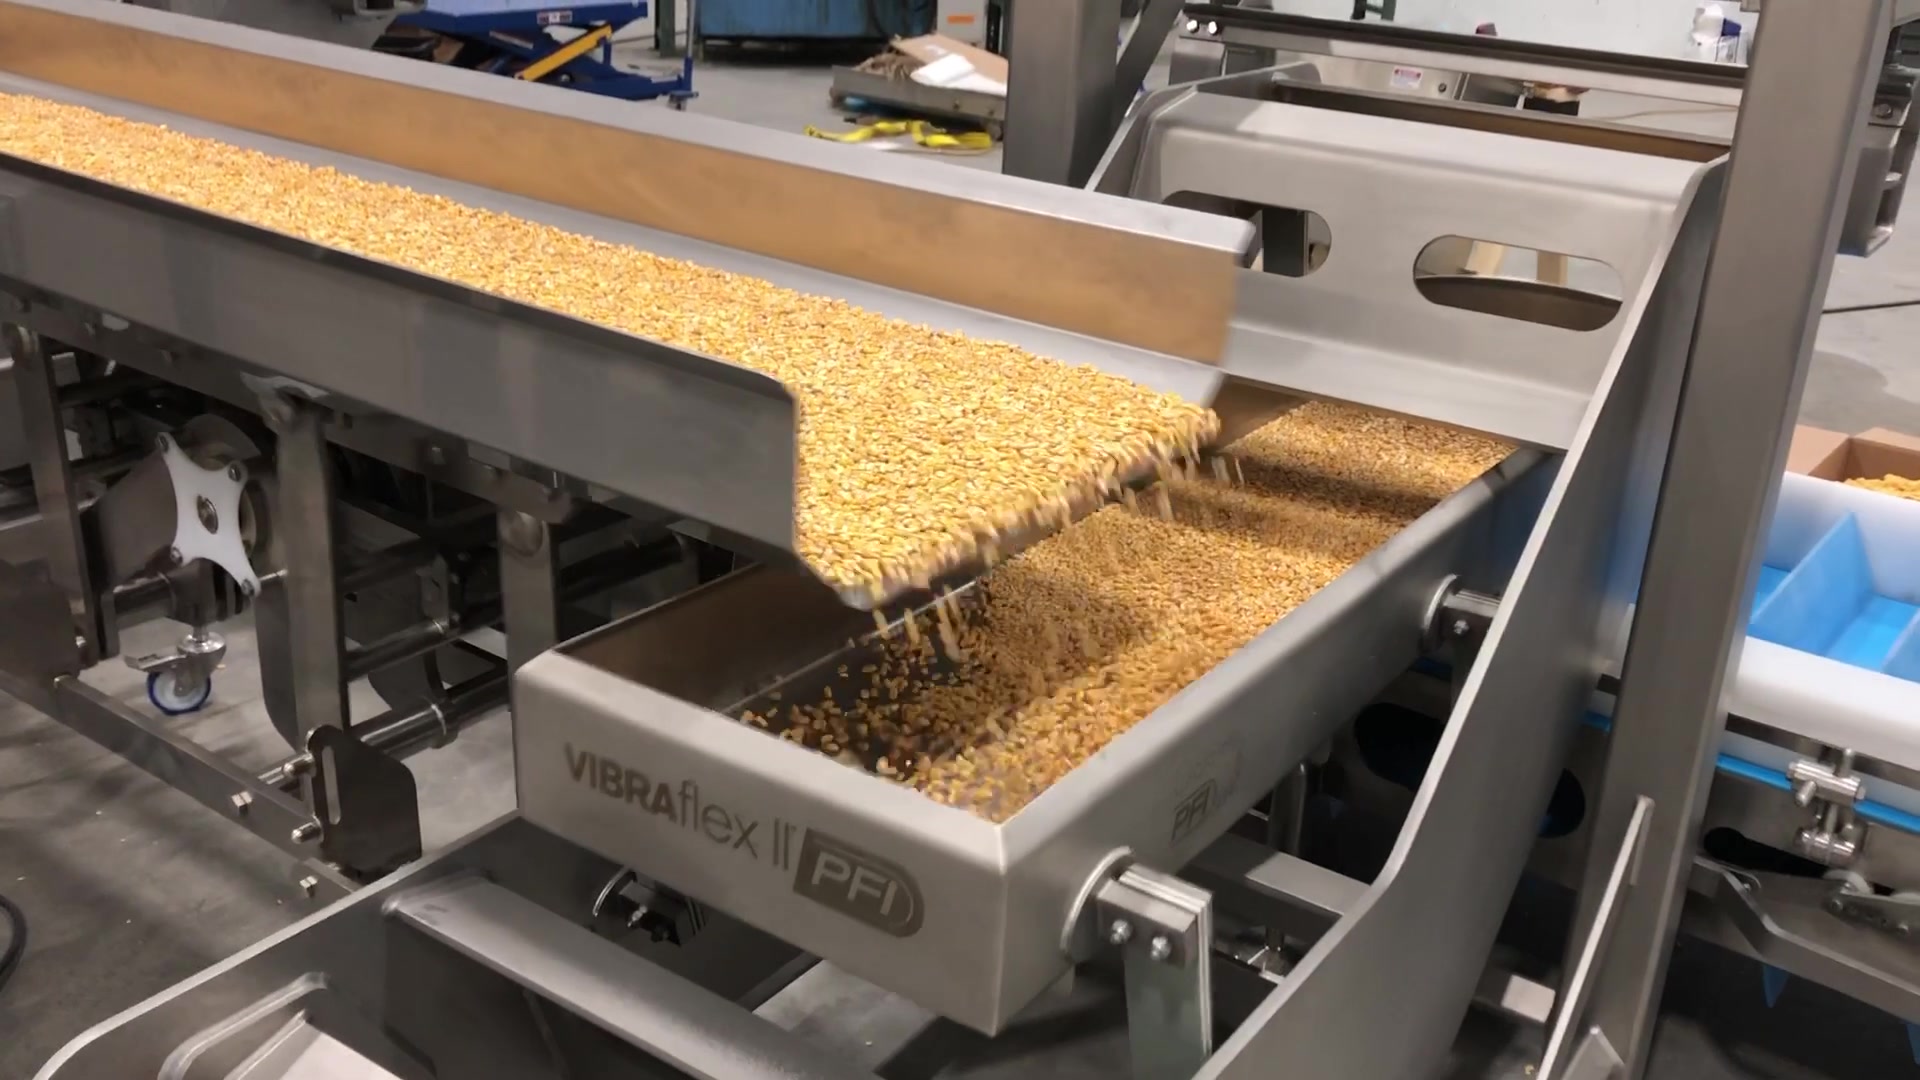 PFI PURmotion conveyor moves product with control over feed rate and reversibility.